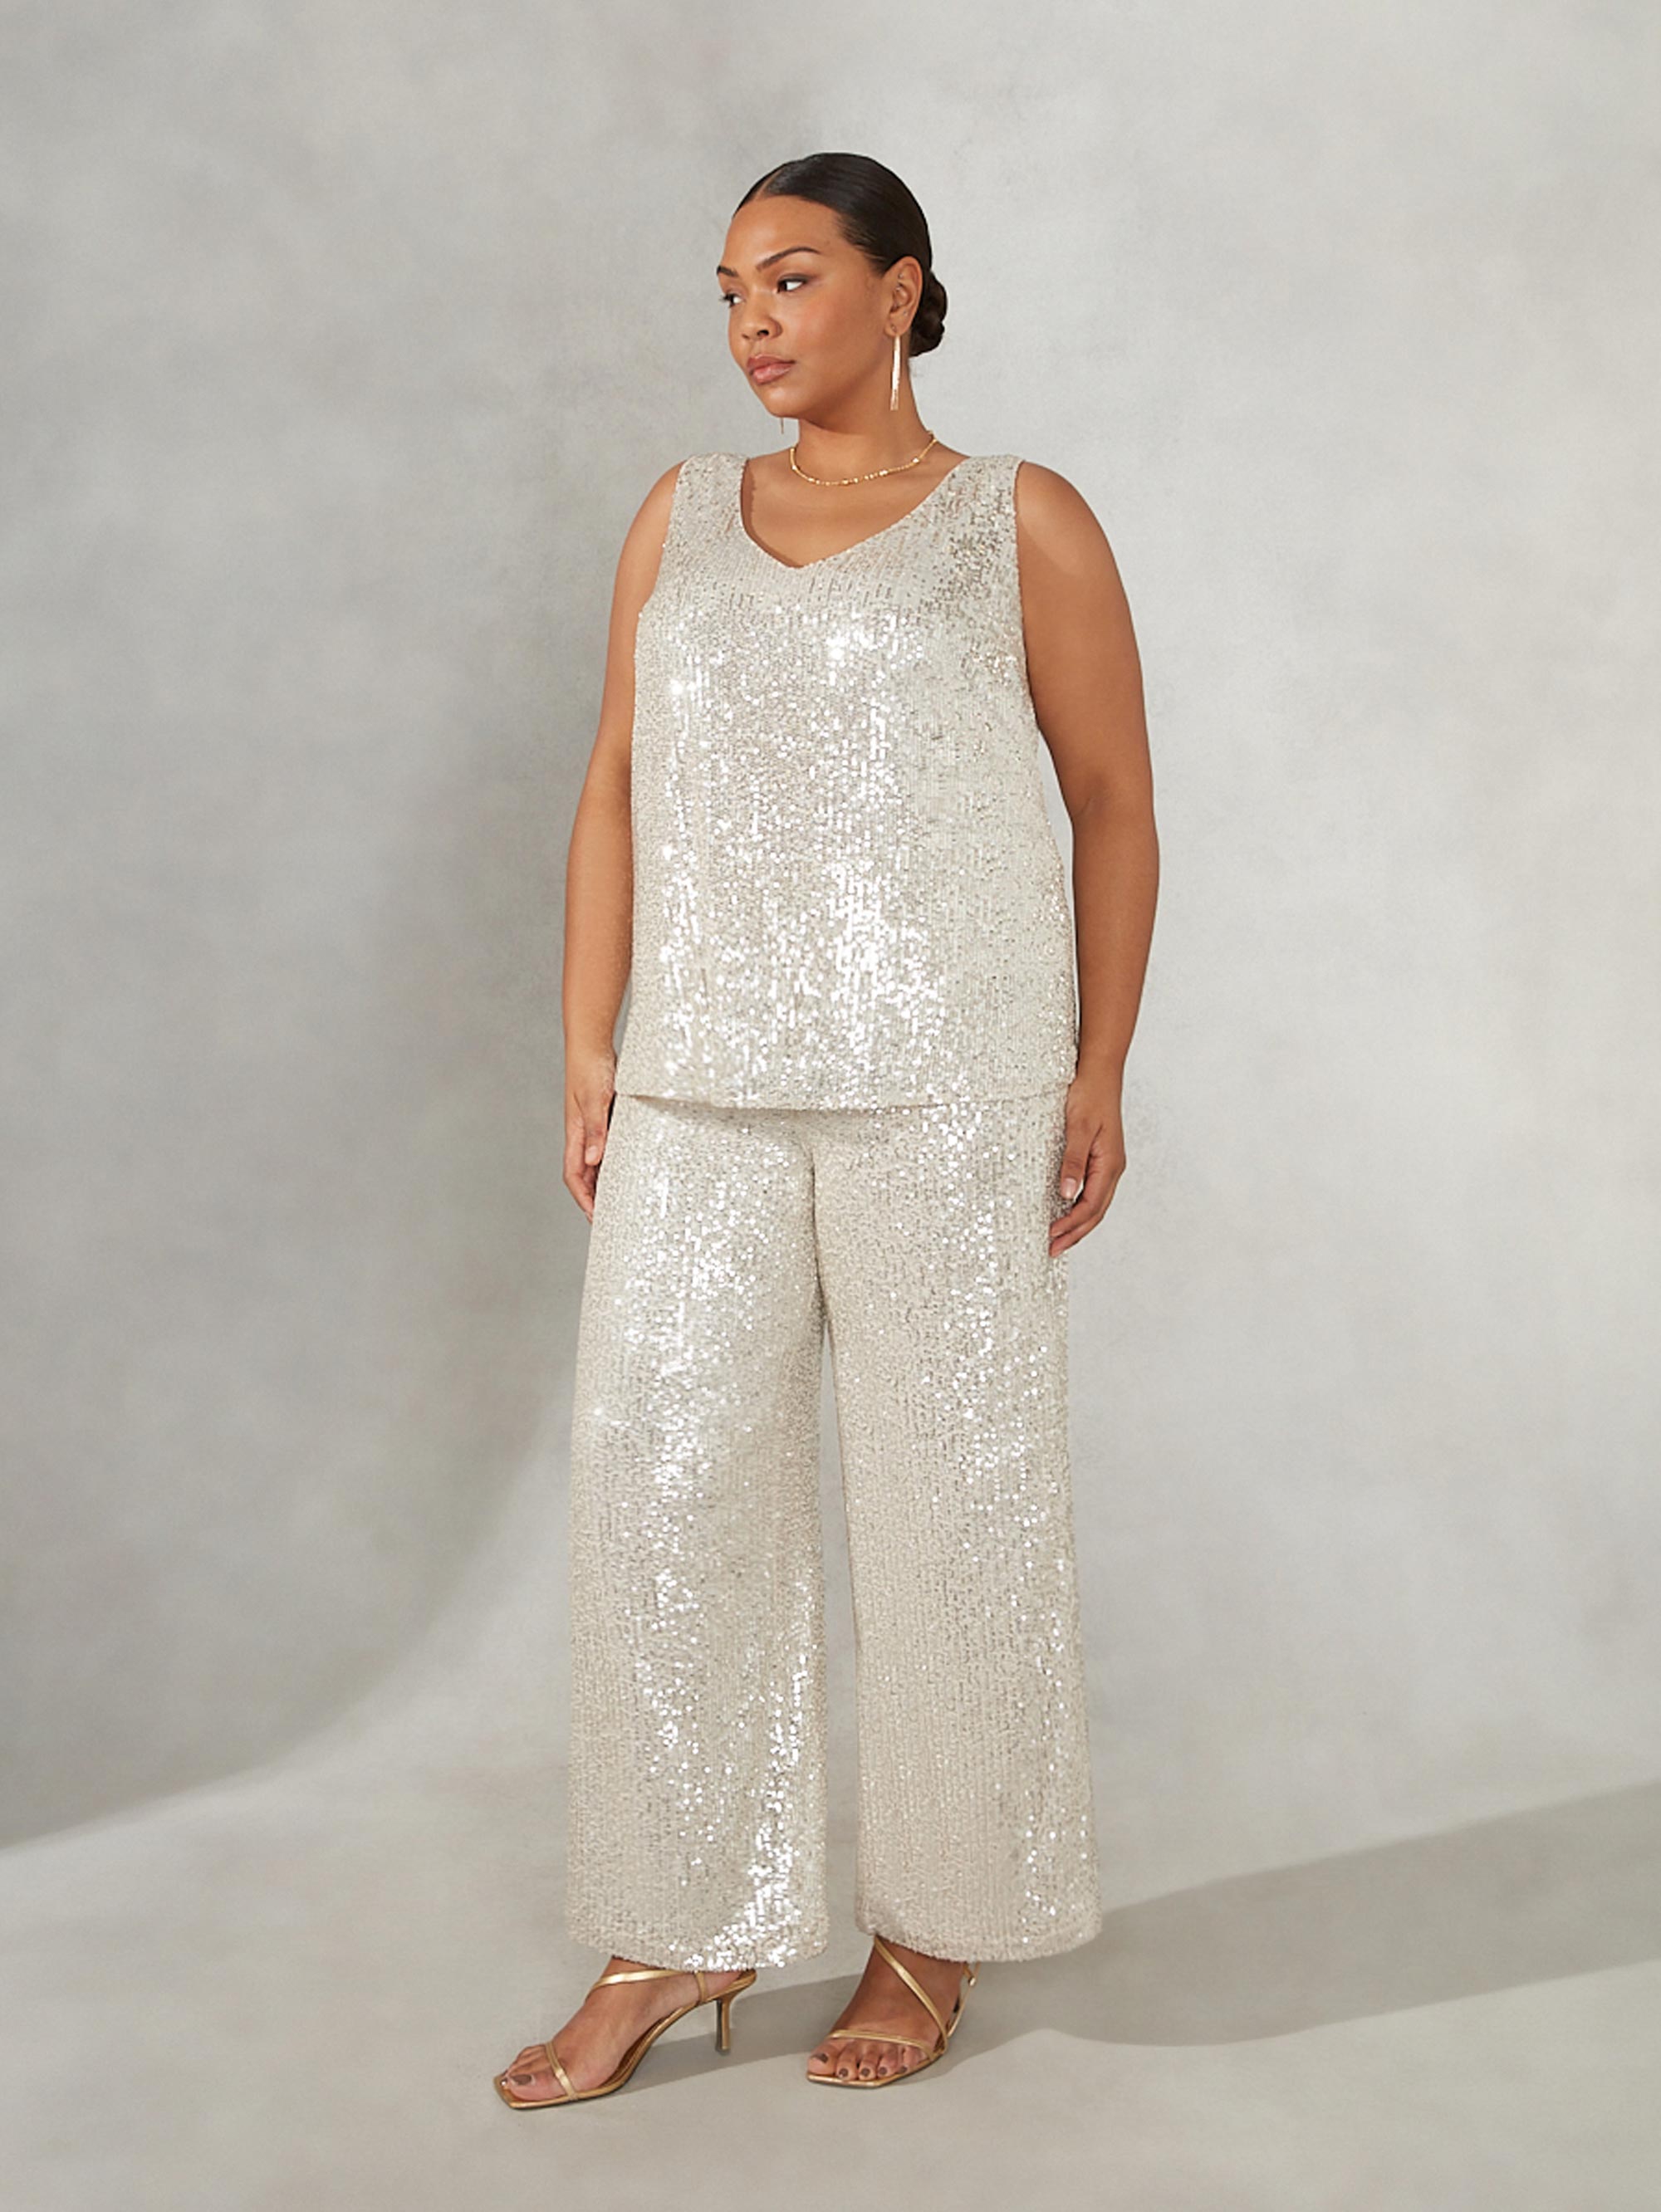 Champagne Sequin Stretch Wideleg Trouser